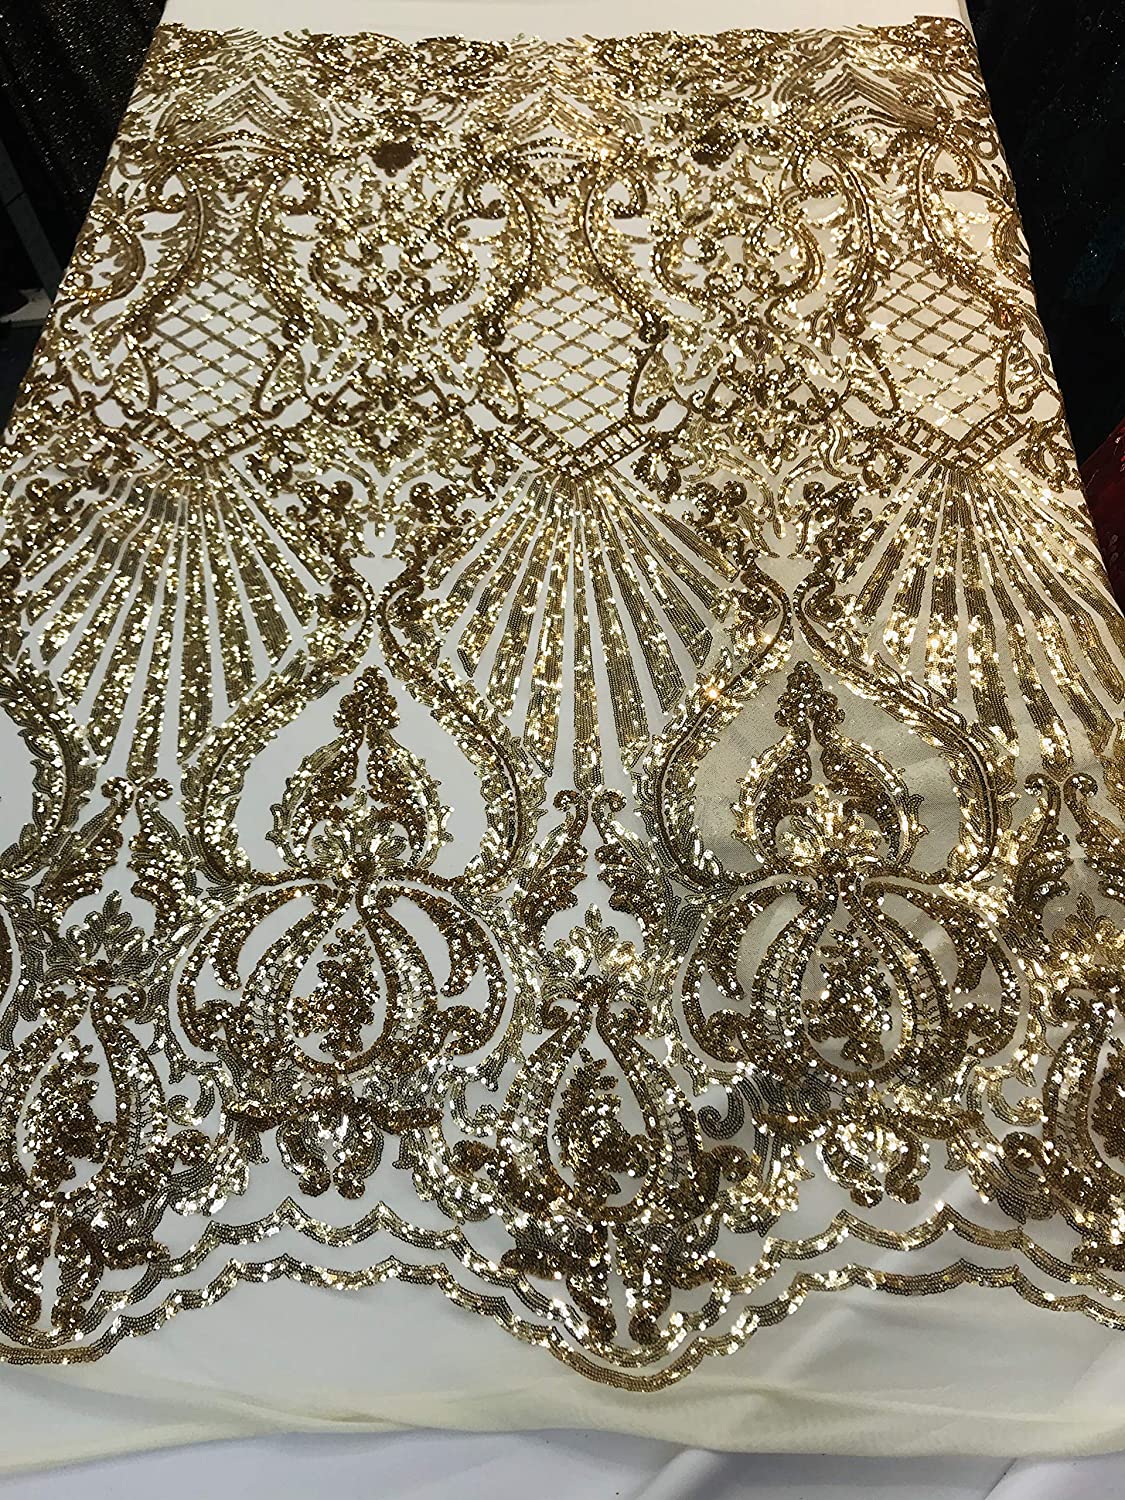 Damask Sequins Design on a 4 Way Stretch Mesh Fabric - for Night Gowns - Prom Dresses - (Gold, 1 Yard)